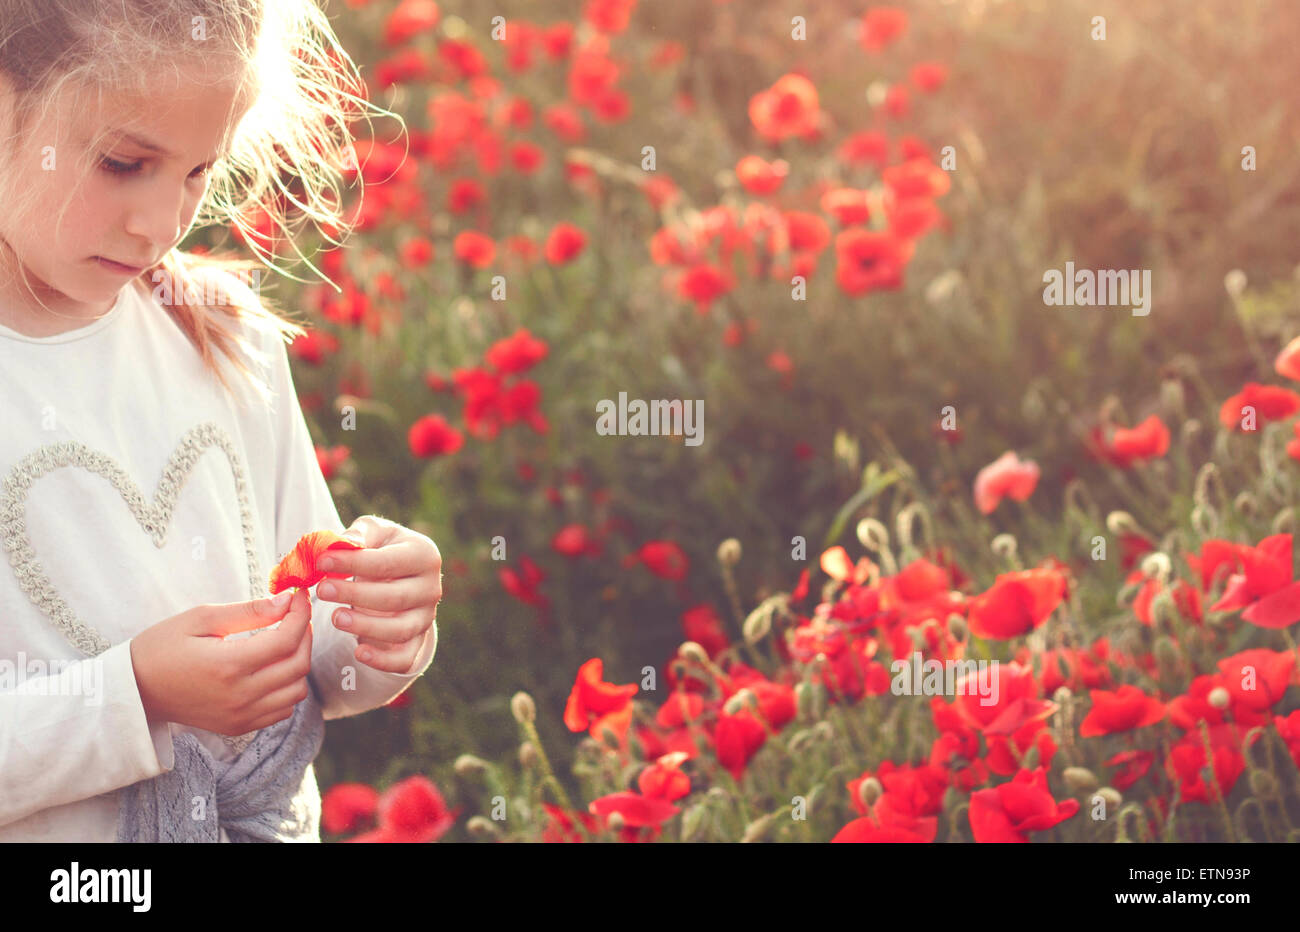 Girl standing in a field of poppies holding a poppy Stock Photo